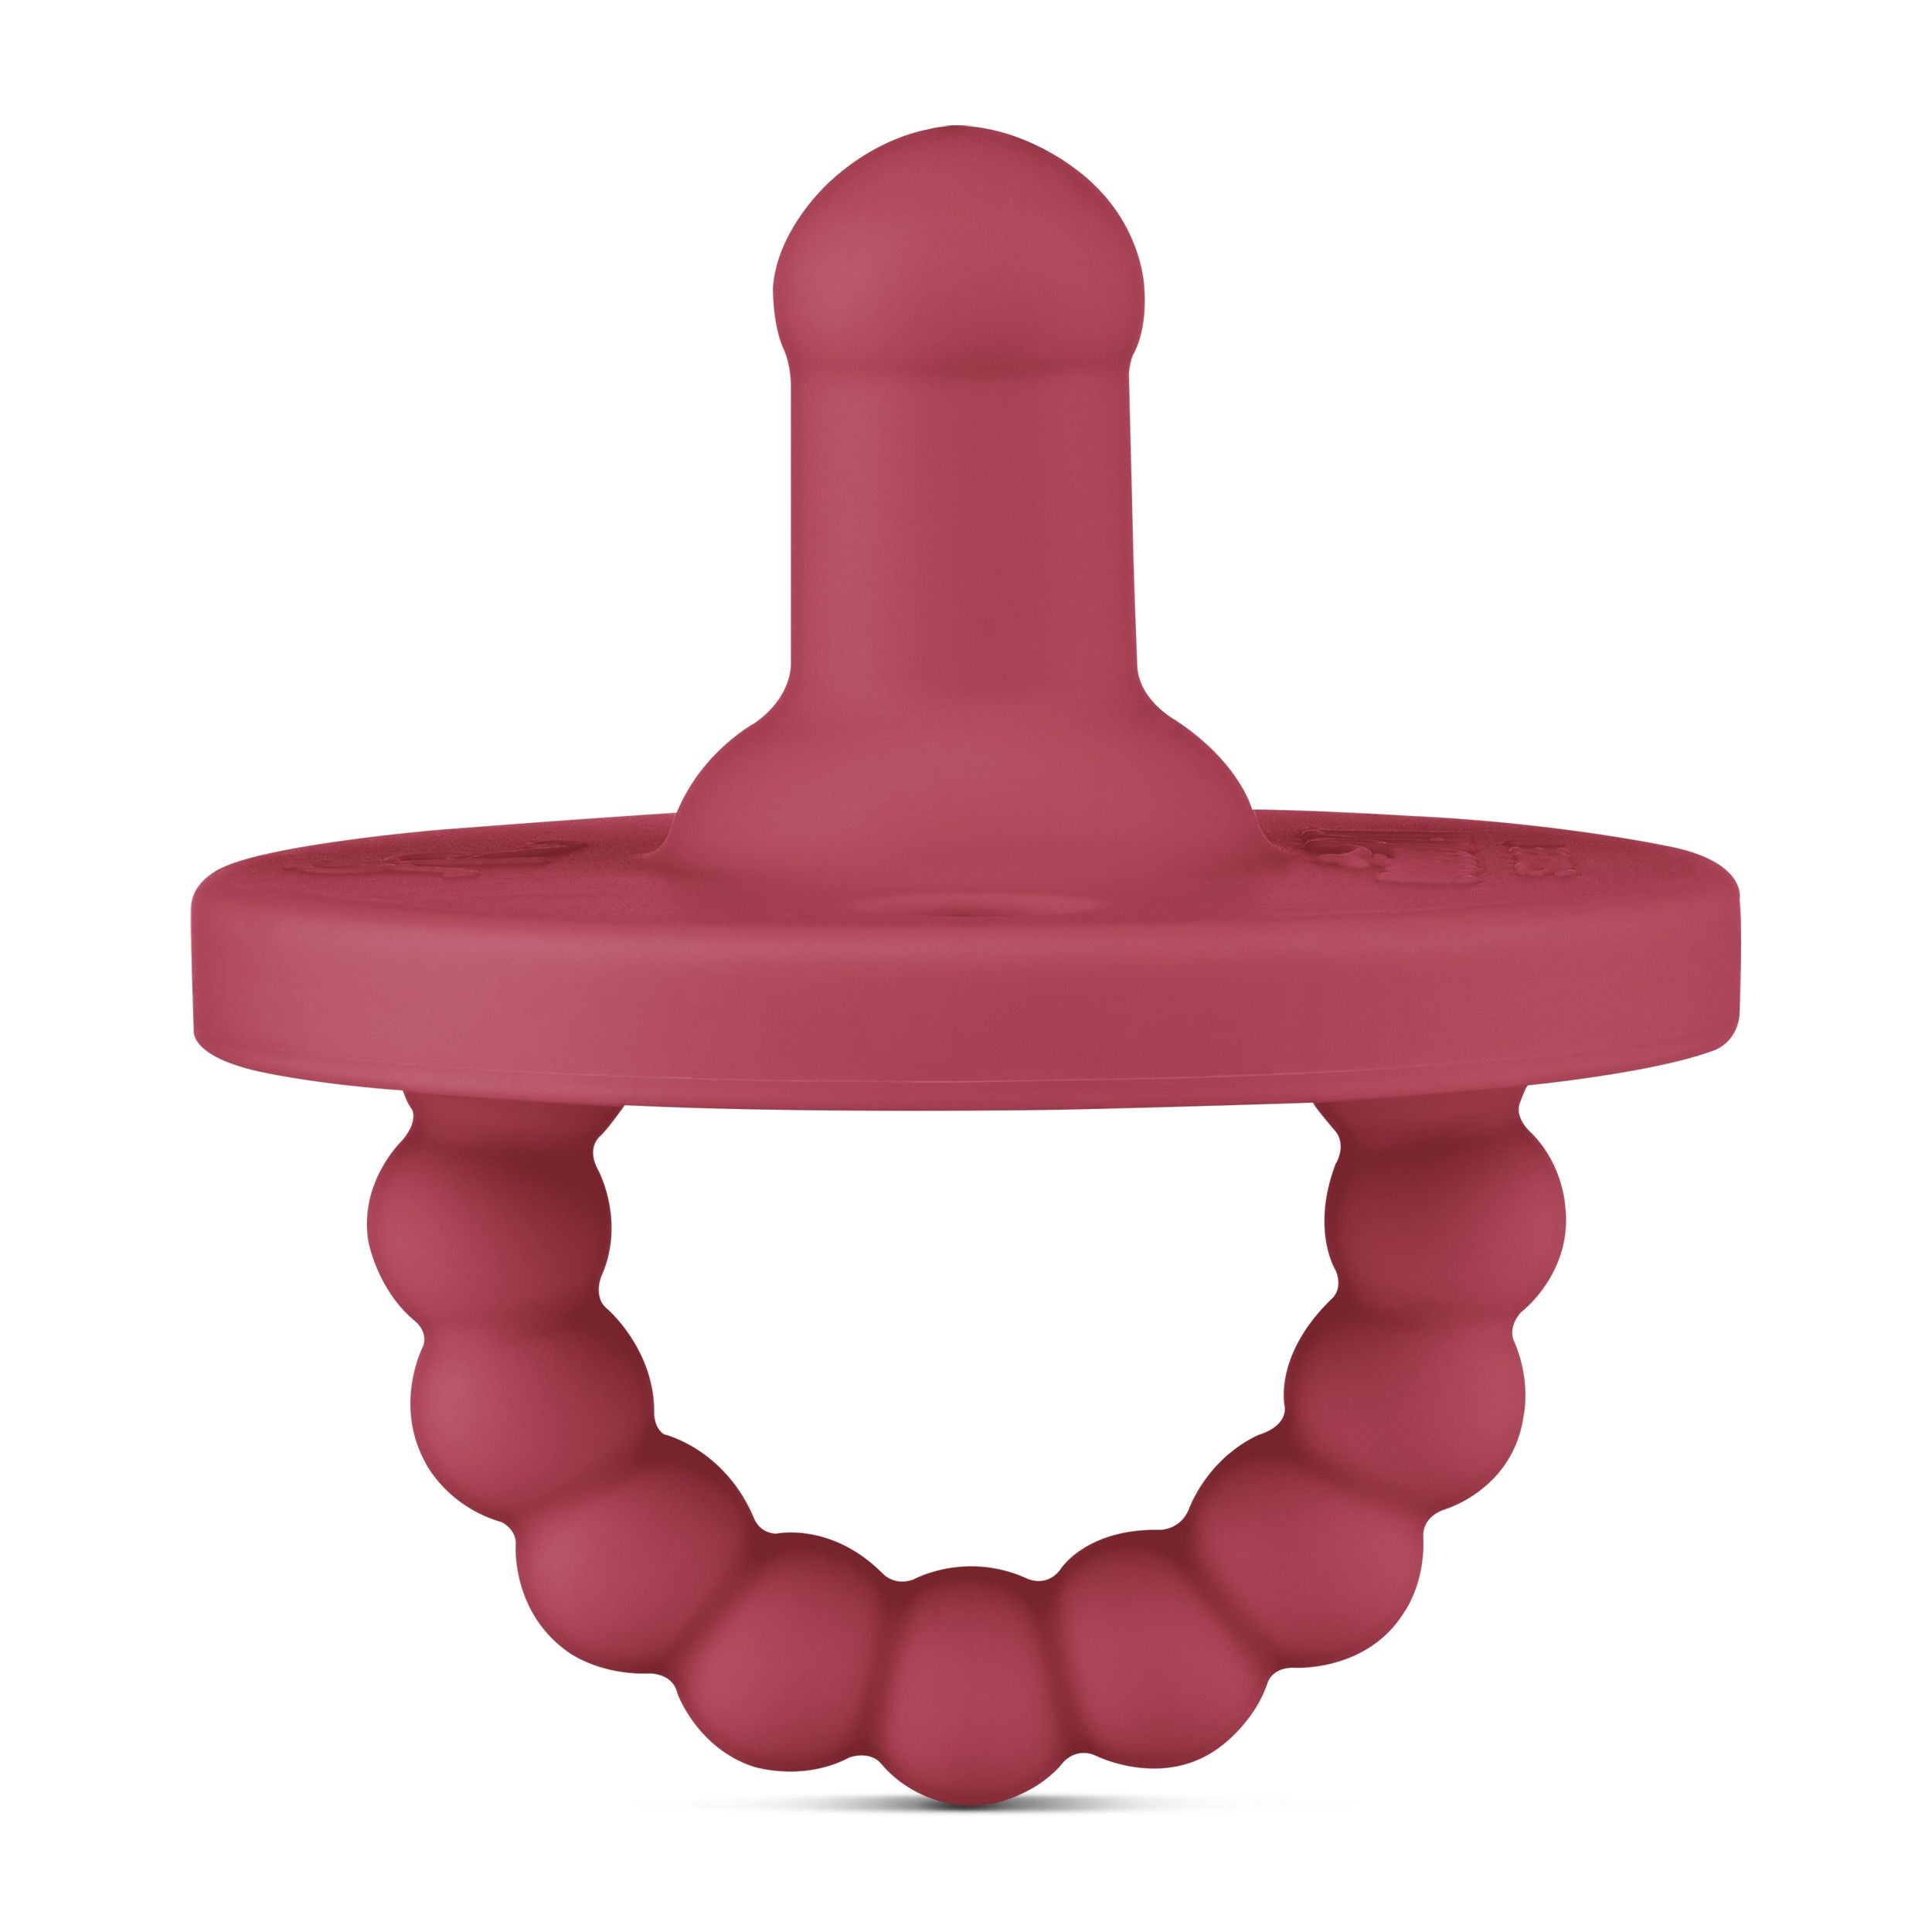 Cutie PAT Round (0-6m) Pacifier + Teether